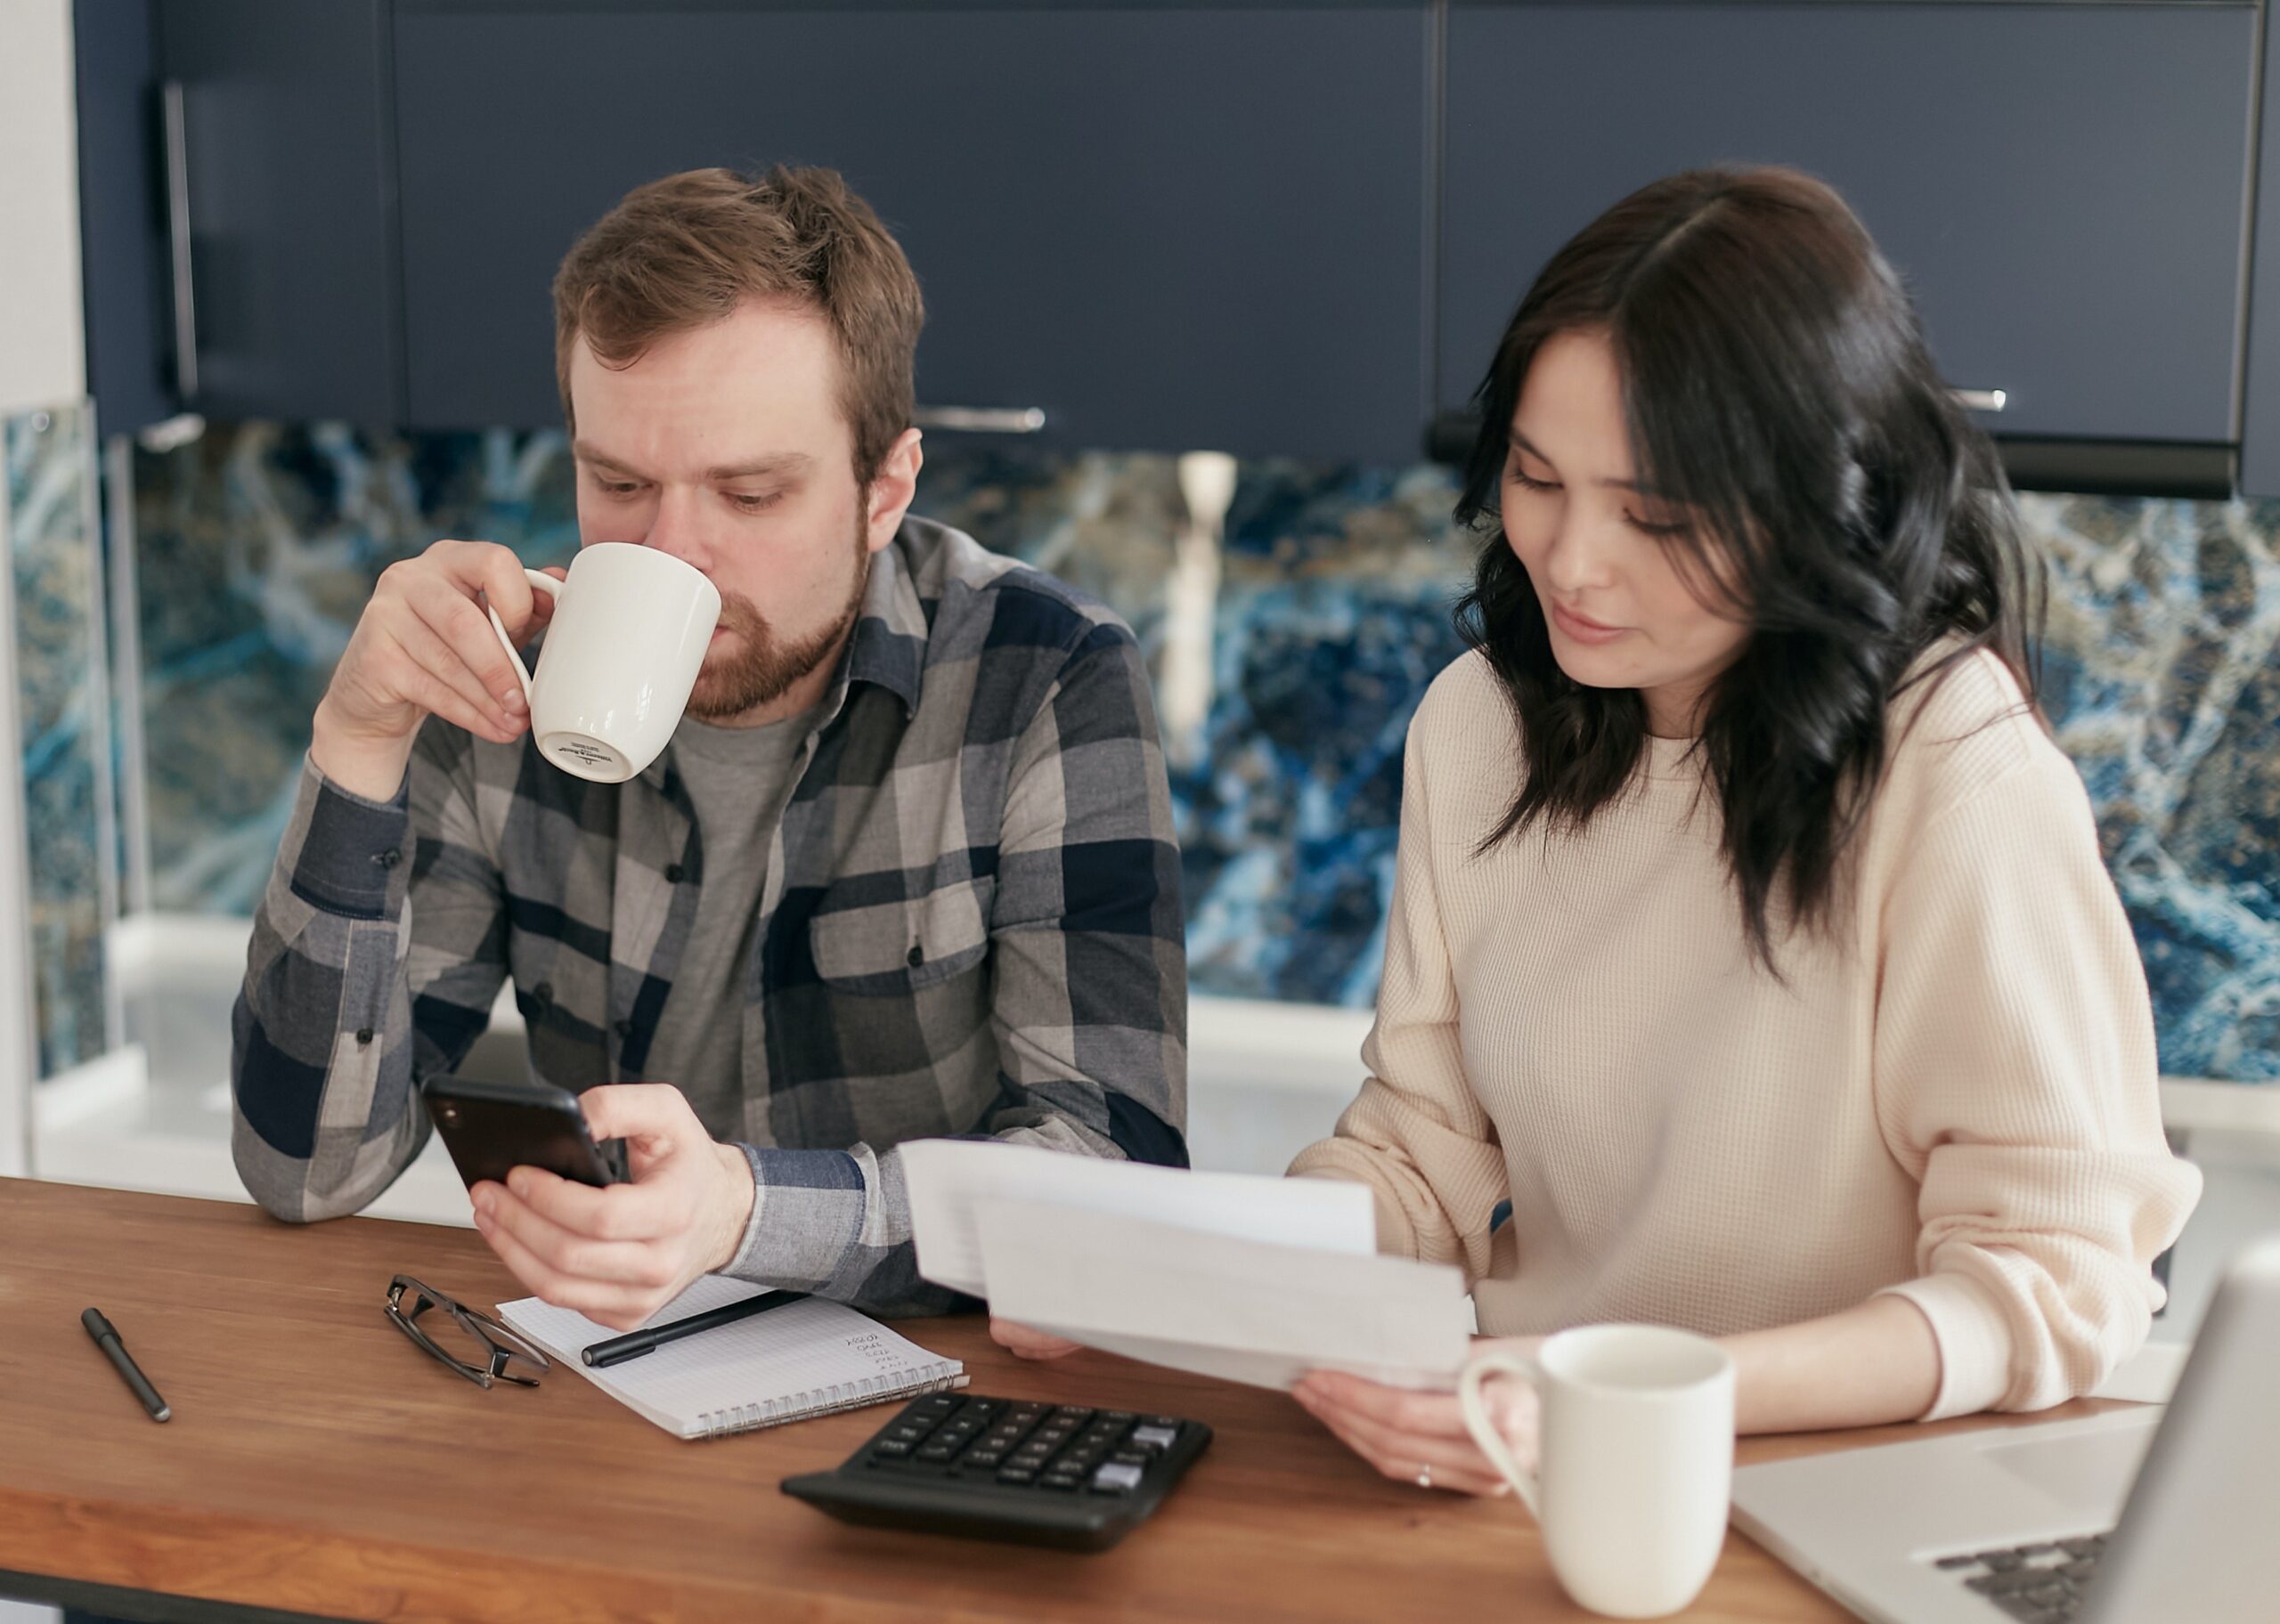 man sipping coffee scrolling his phone sitting next to woman reading papers